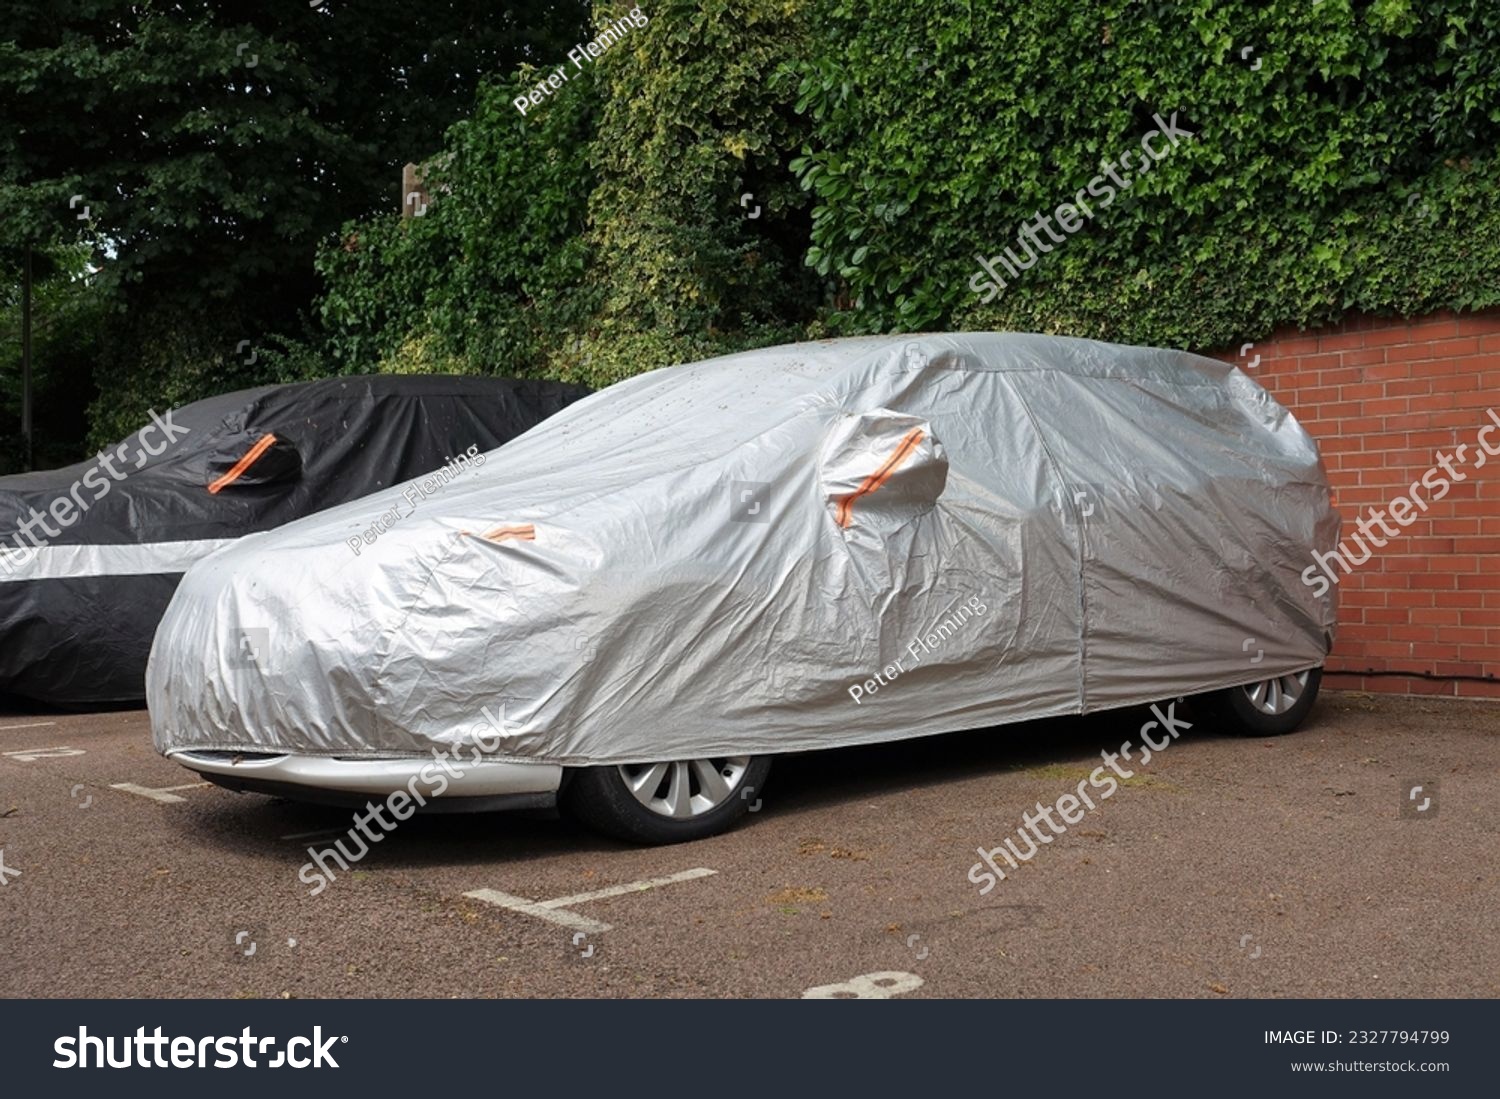 Vehicle under protective cover in parking space #2327794799